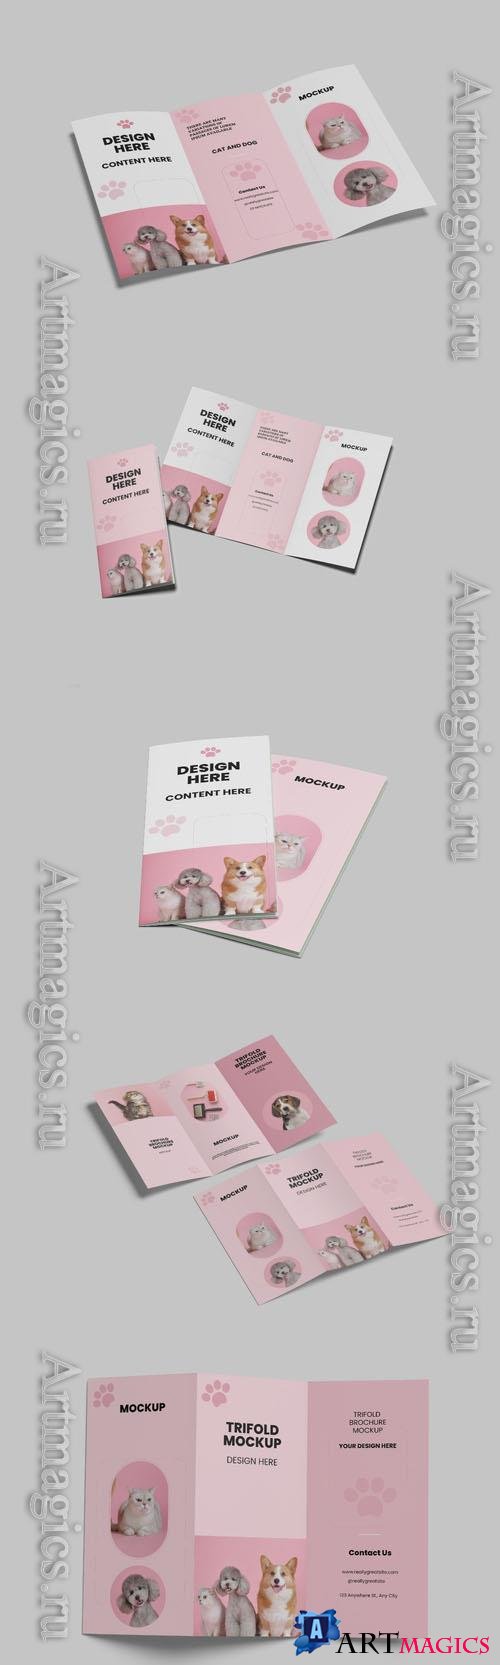 Trifold pink and white design psd brochure mockup